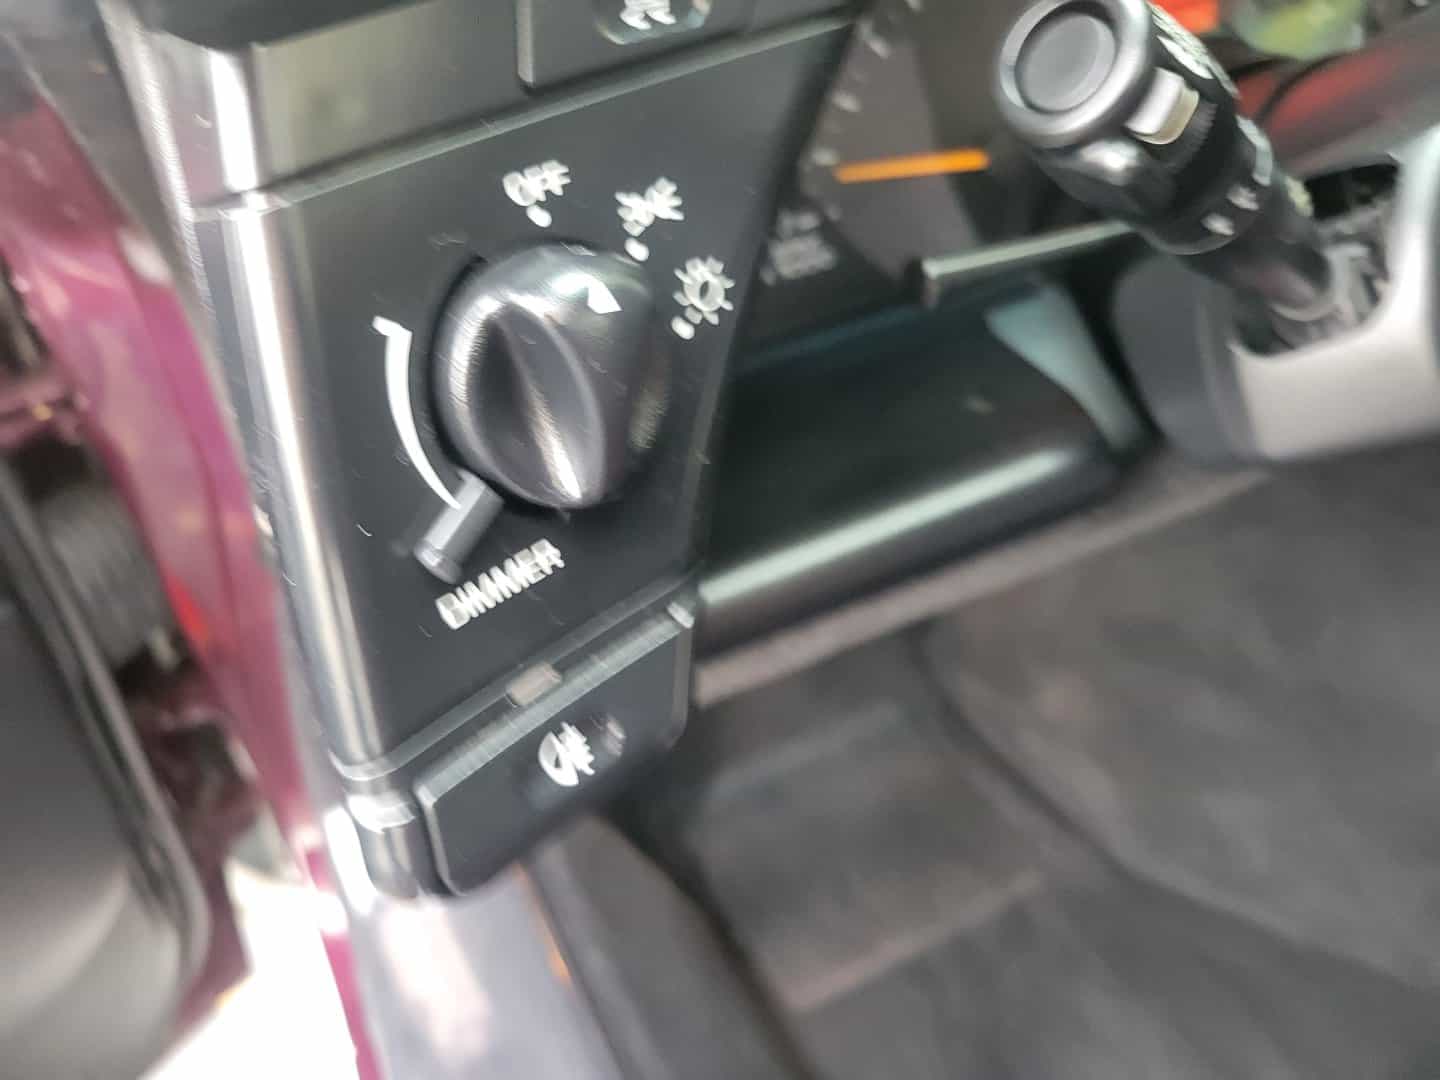 A picture of the dashboard of a 1995 Corvette Pace Car.